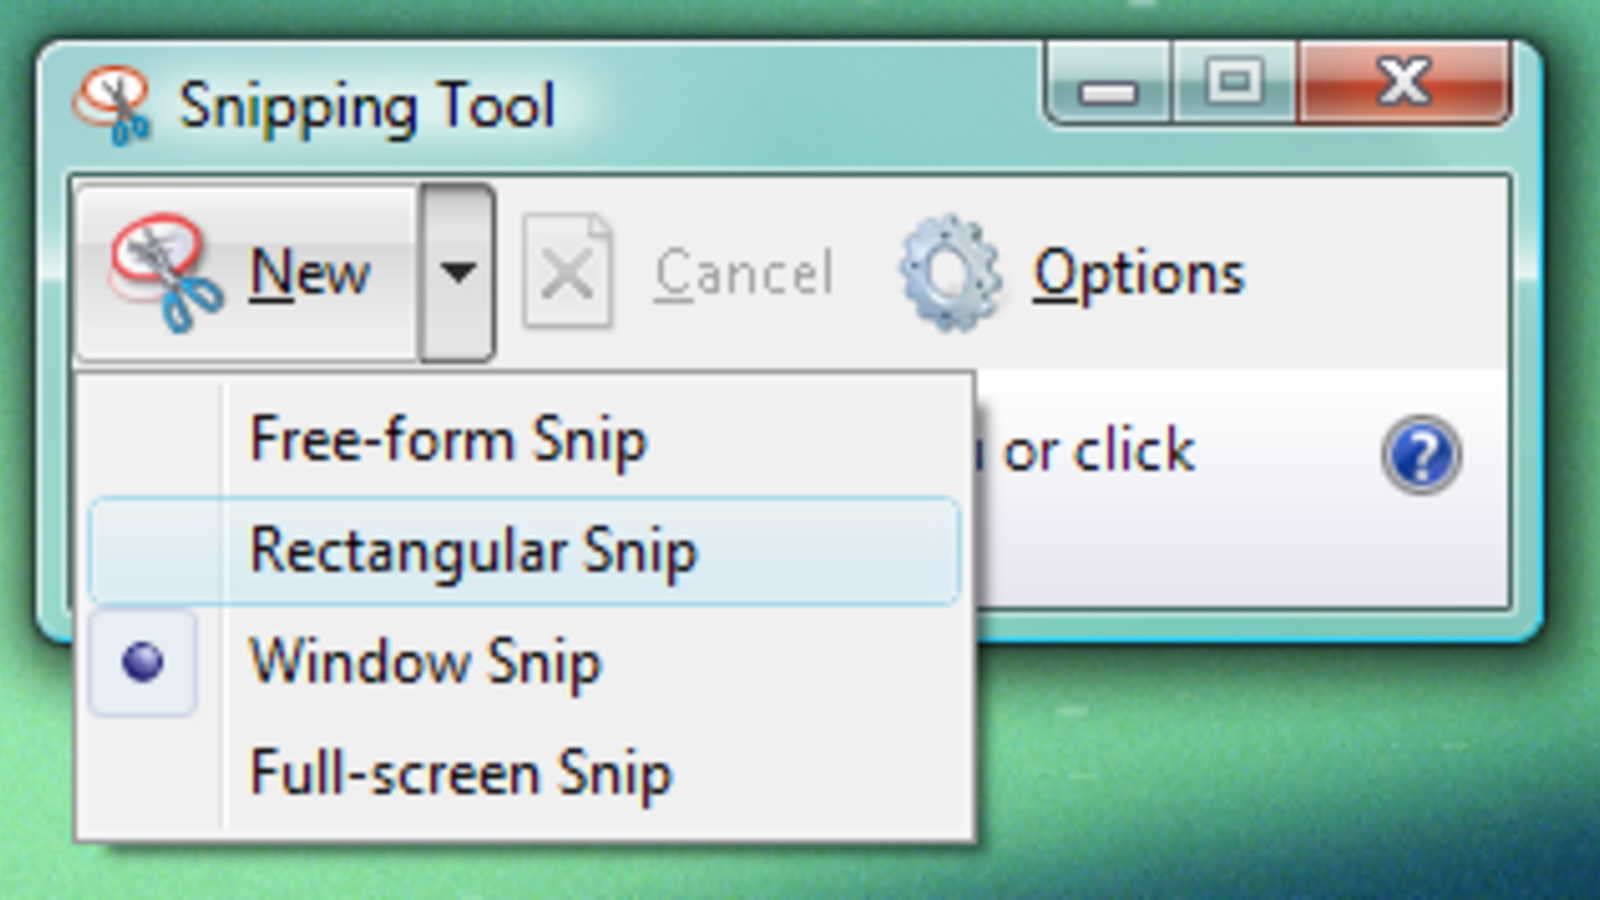 How to use snipping tool on mac